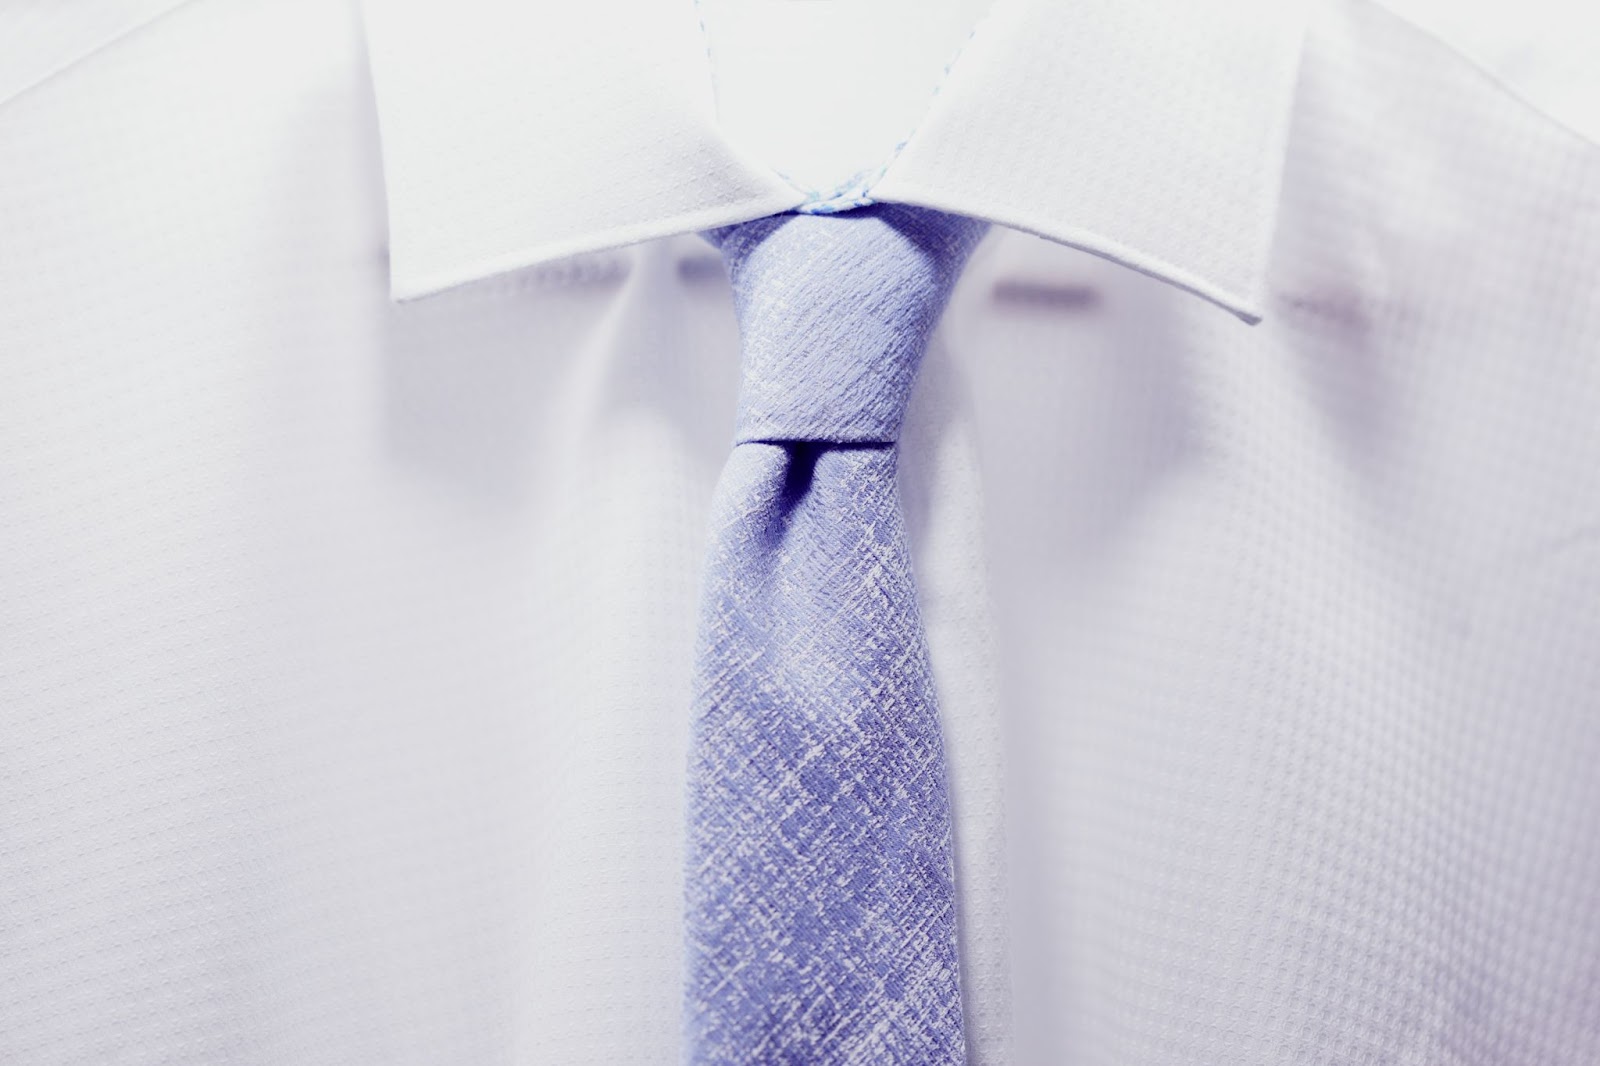 The term white collar comes from clothes worn at the office